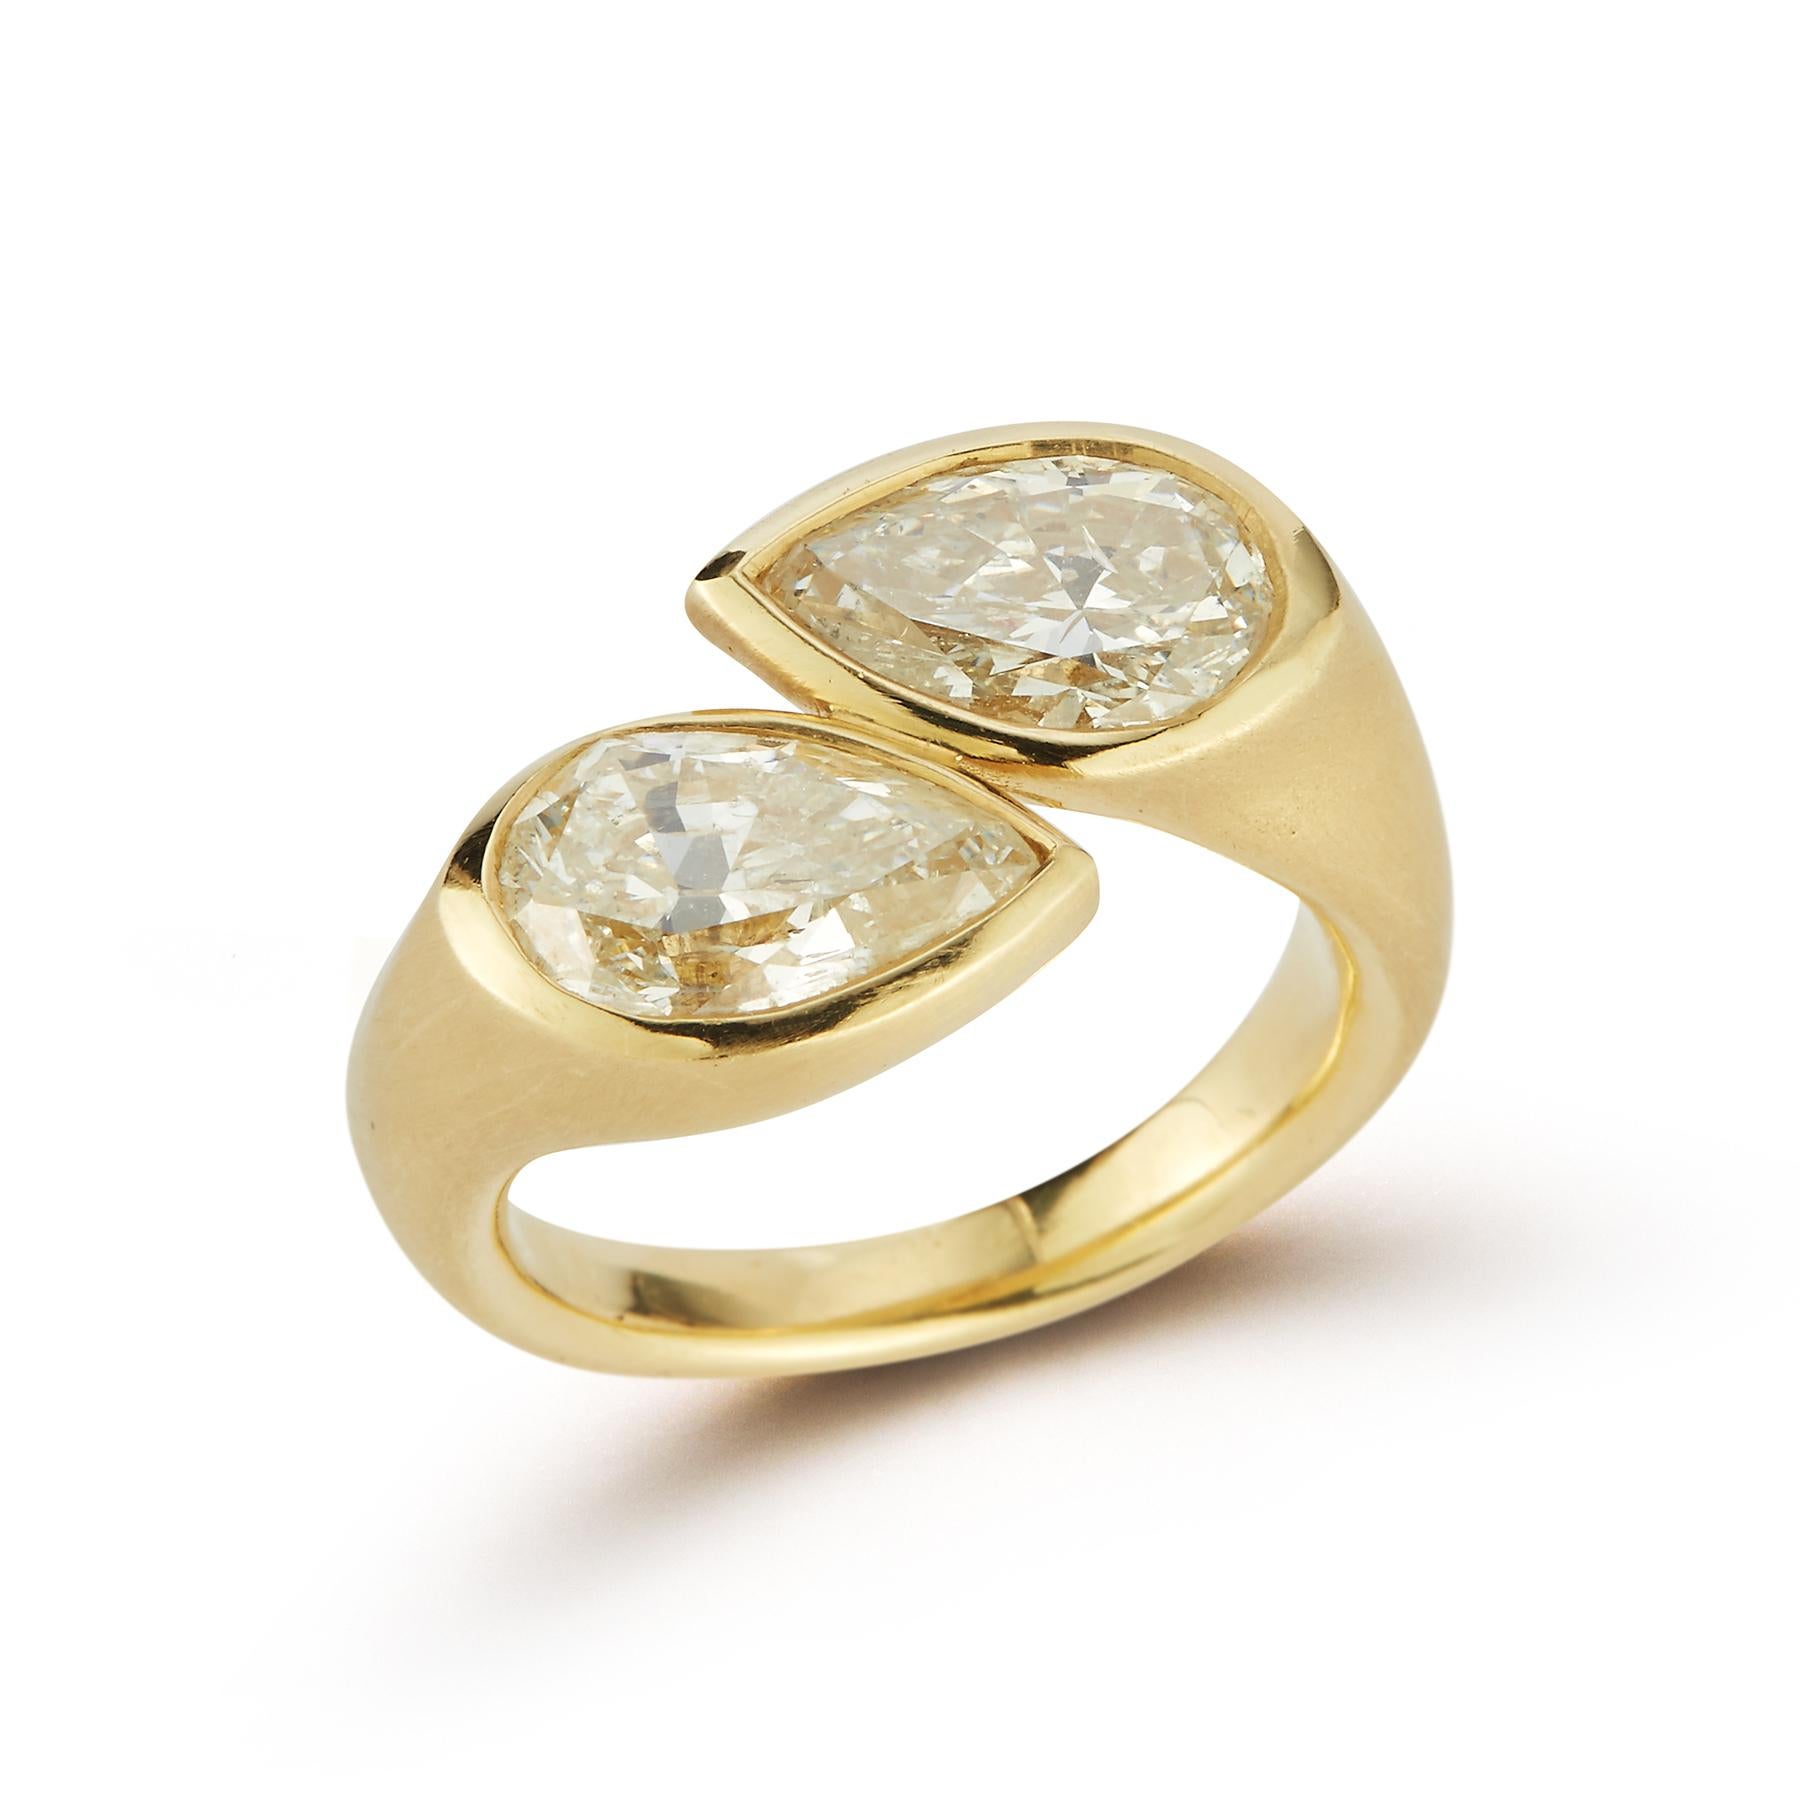 Fancy Yellow Pear Shaper Two Stone Diamond Ring GIA Certified, set in 18K Yellow Gold with a matte finish
Diamond Weight: 5.34
Color: K &M
Ring Size: 9
Re-sizable free of charge 
